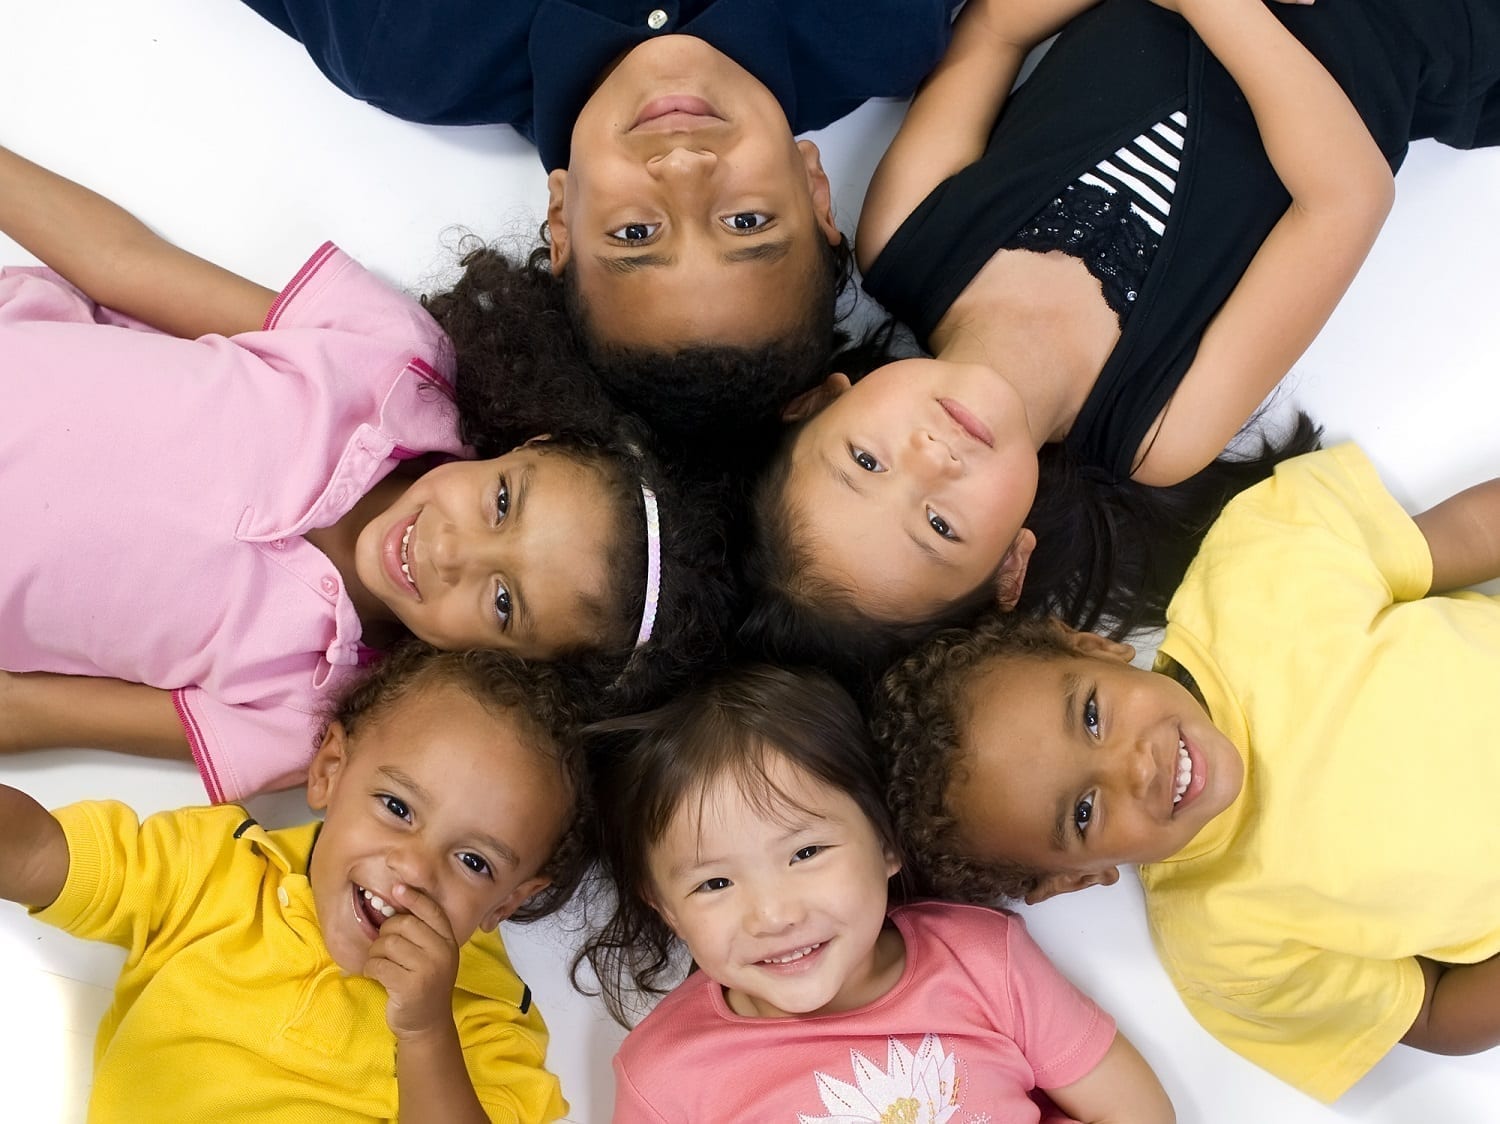 Children of different ethnic backgrounds forming a star shape: ID 4159688 © Thomas Perkins | Dreamstime.com